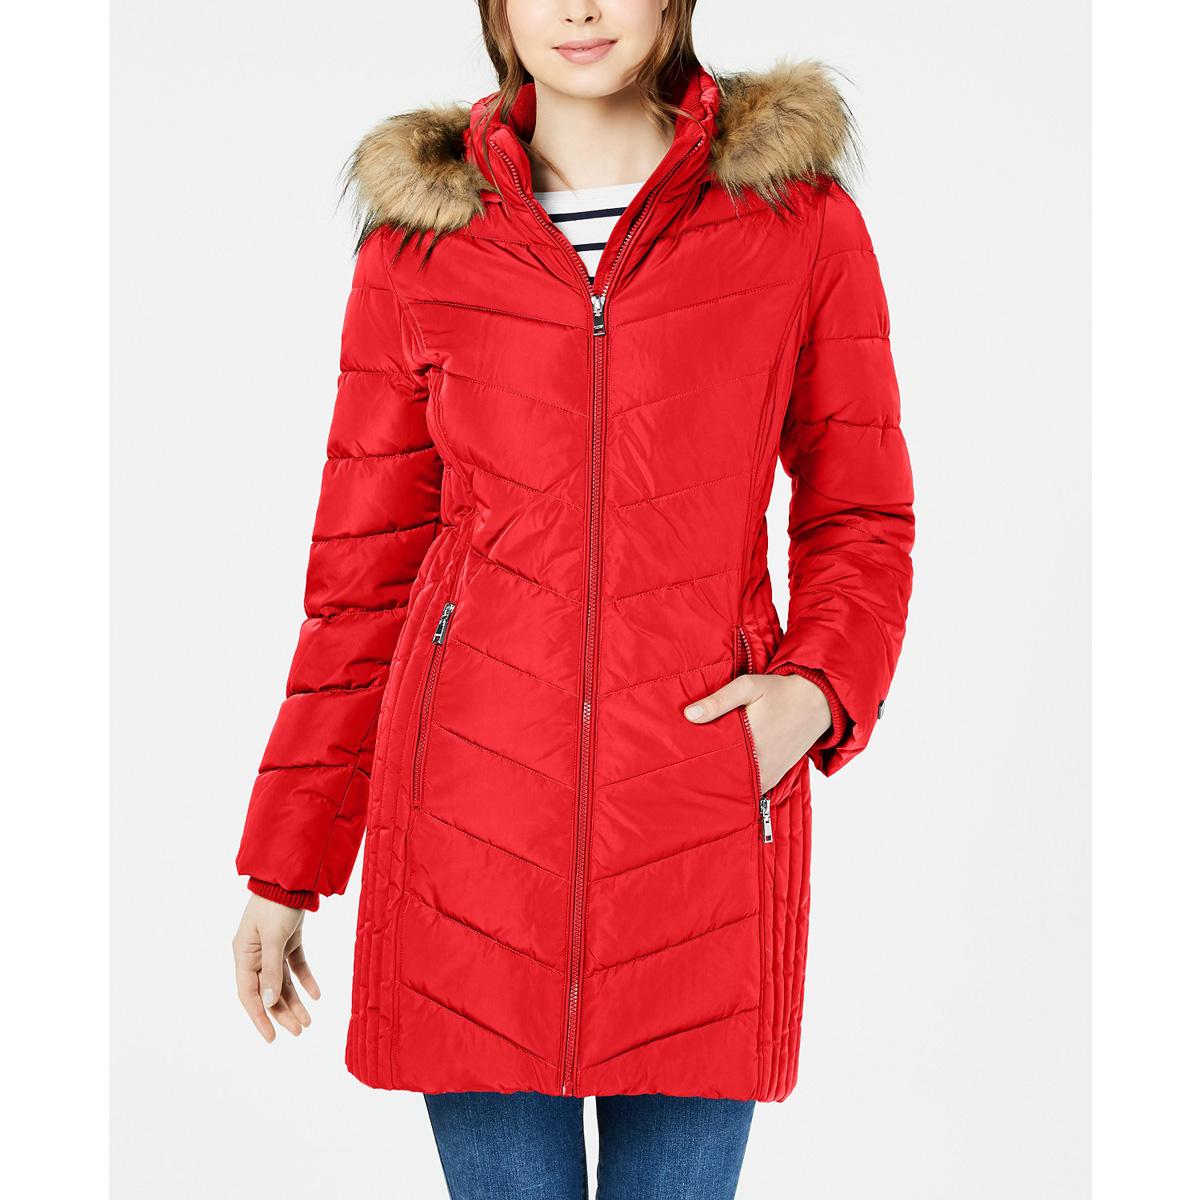 Tommy Hilfiger Chevron Faux-Fur Trim Hooded Puffer Coat for $61.25 Shipped